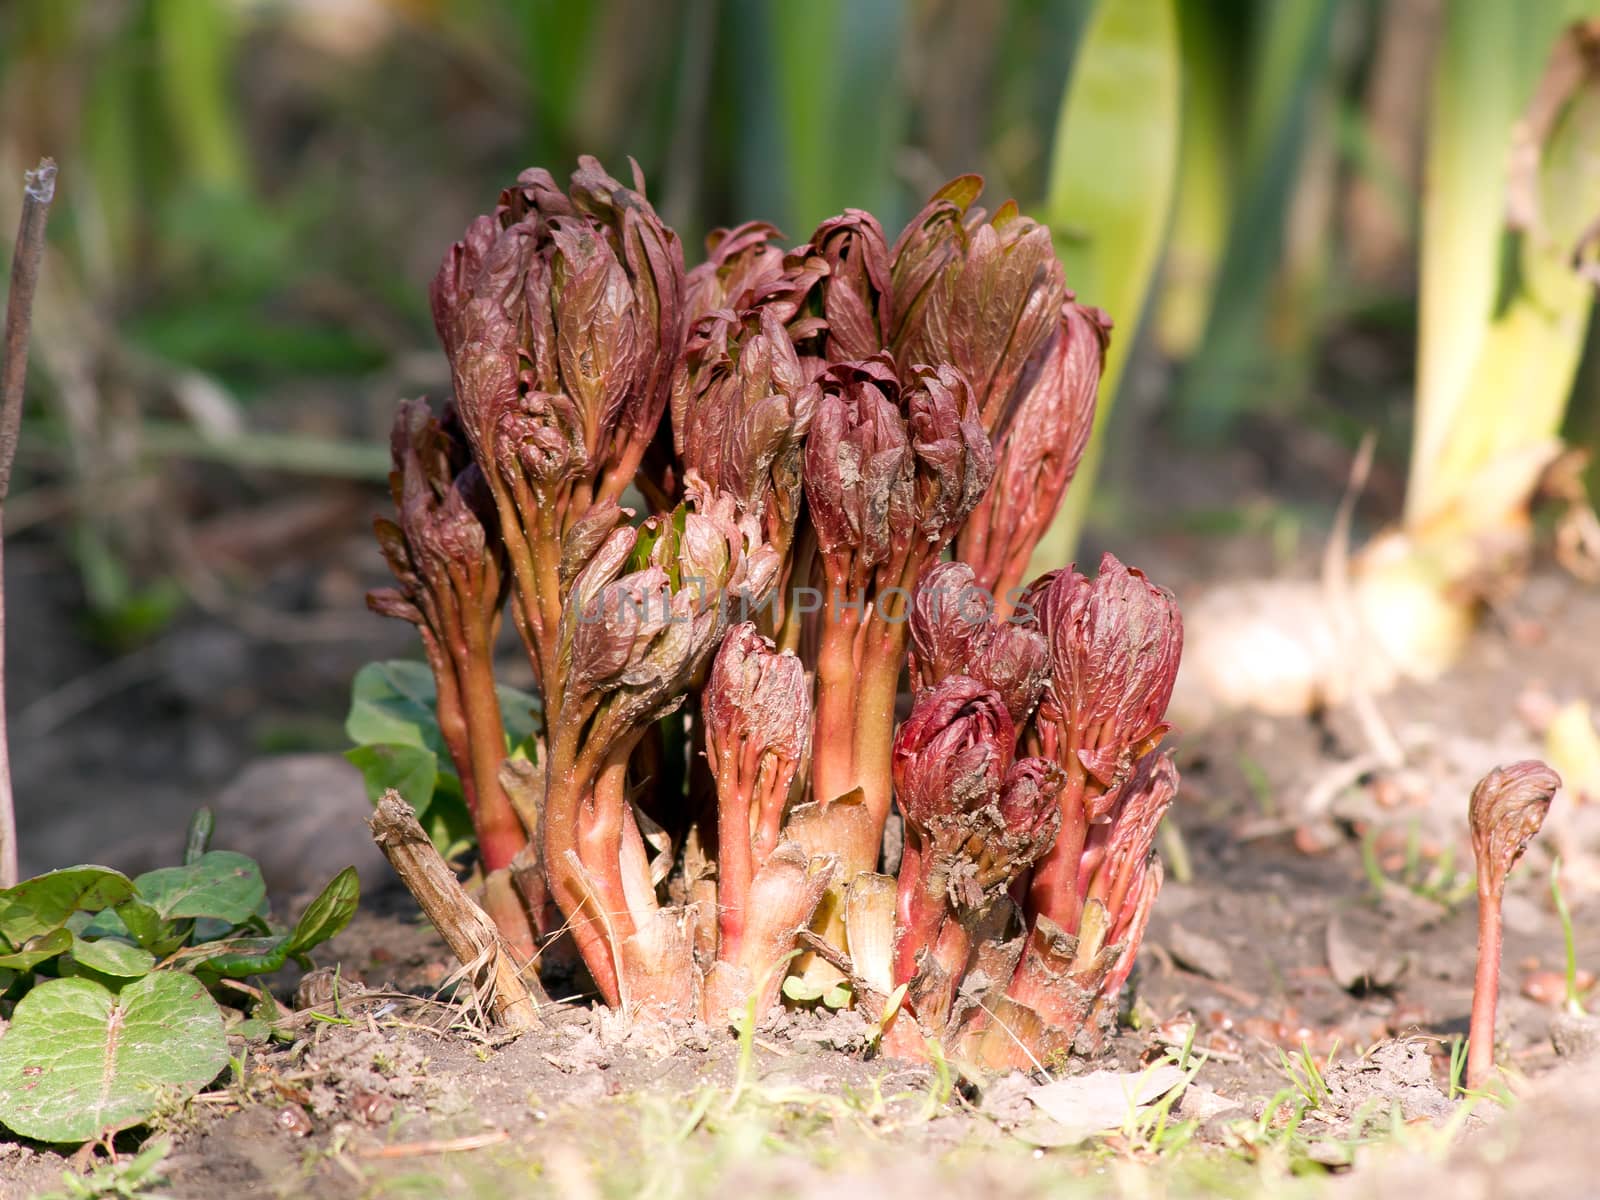 In the spring of peony (Paeonia lactiflora) sprout.